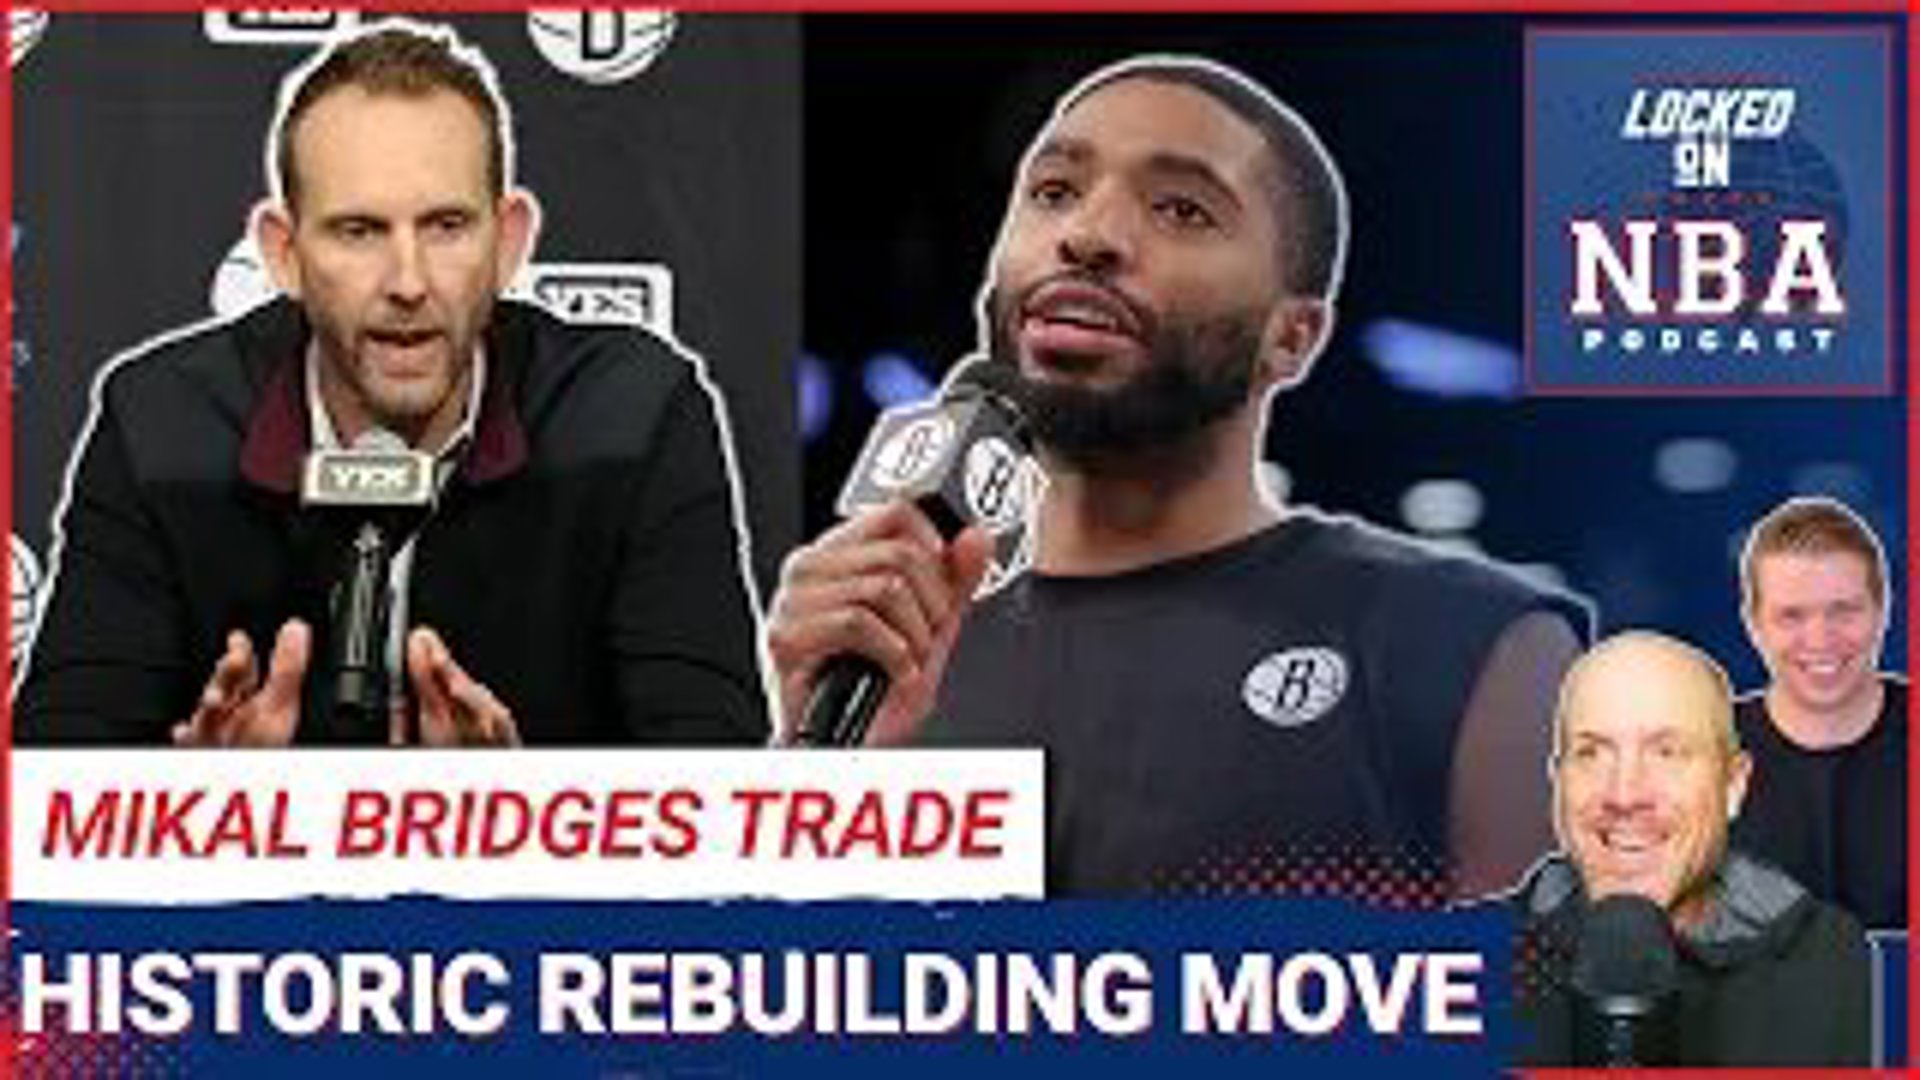 The Brooklyn Nets traded for Mikal Bridges to the New York Knicks to pair with his Villanova teammates Jalen Brunson, Josh Hart, and Donte DiVincenzo.